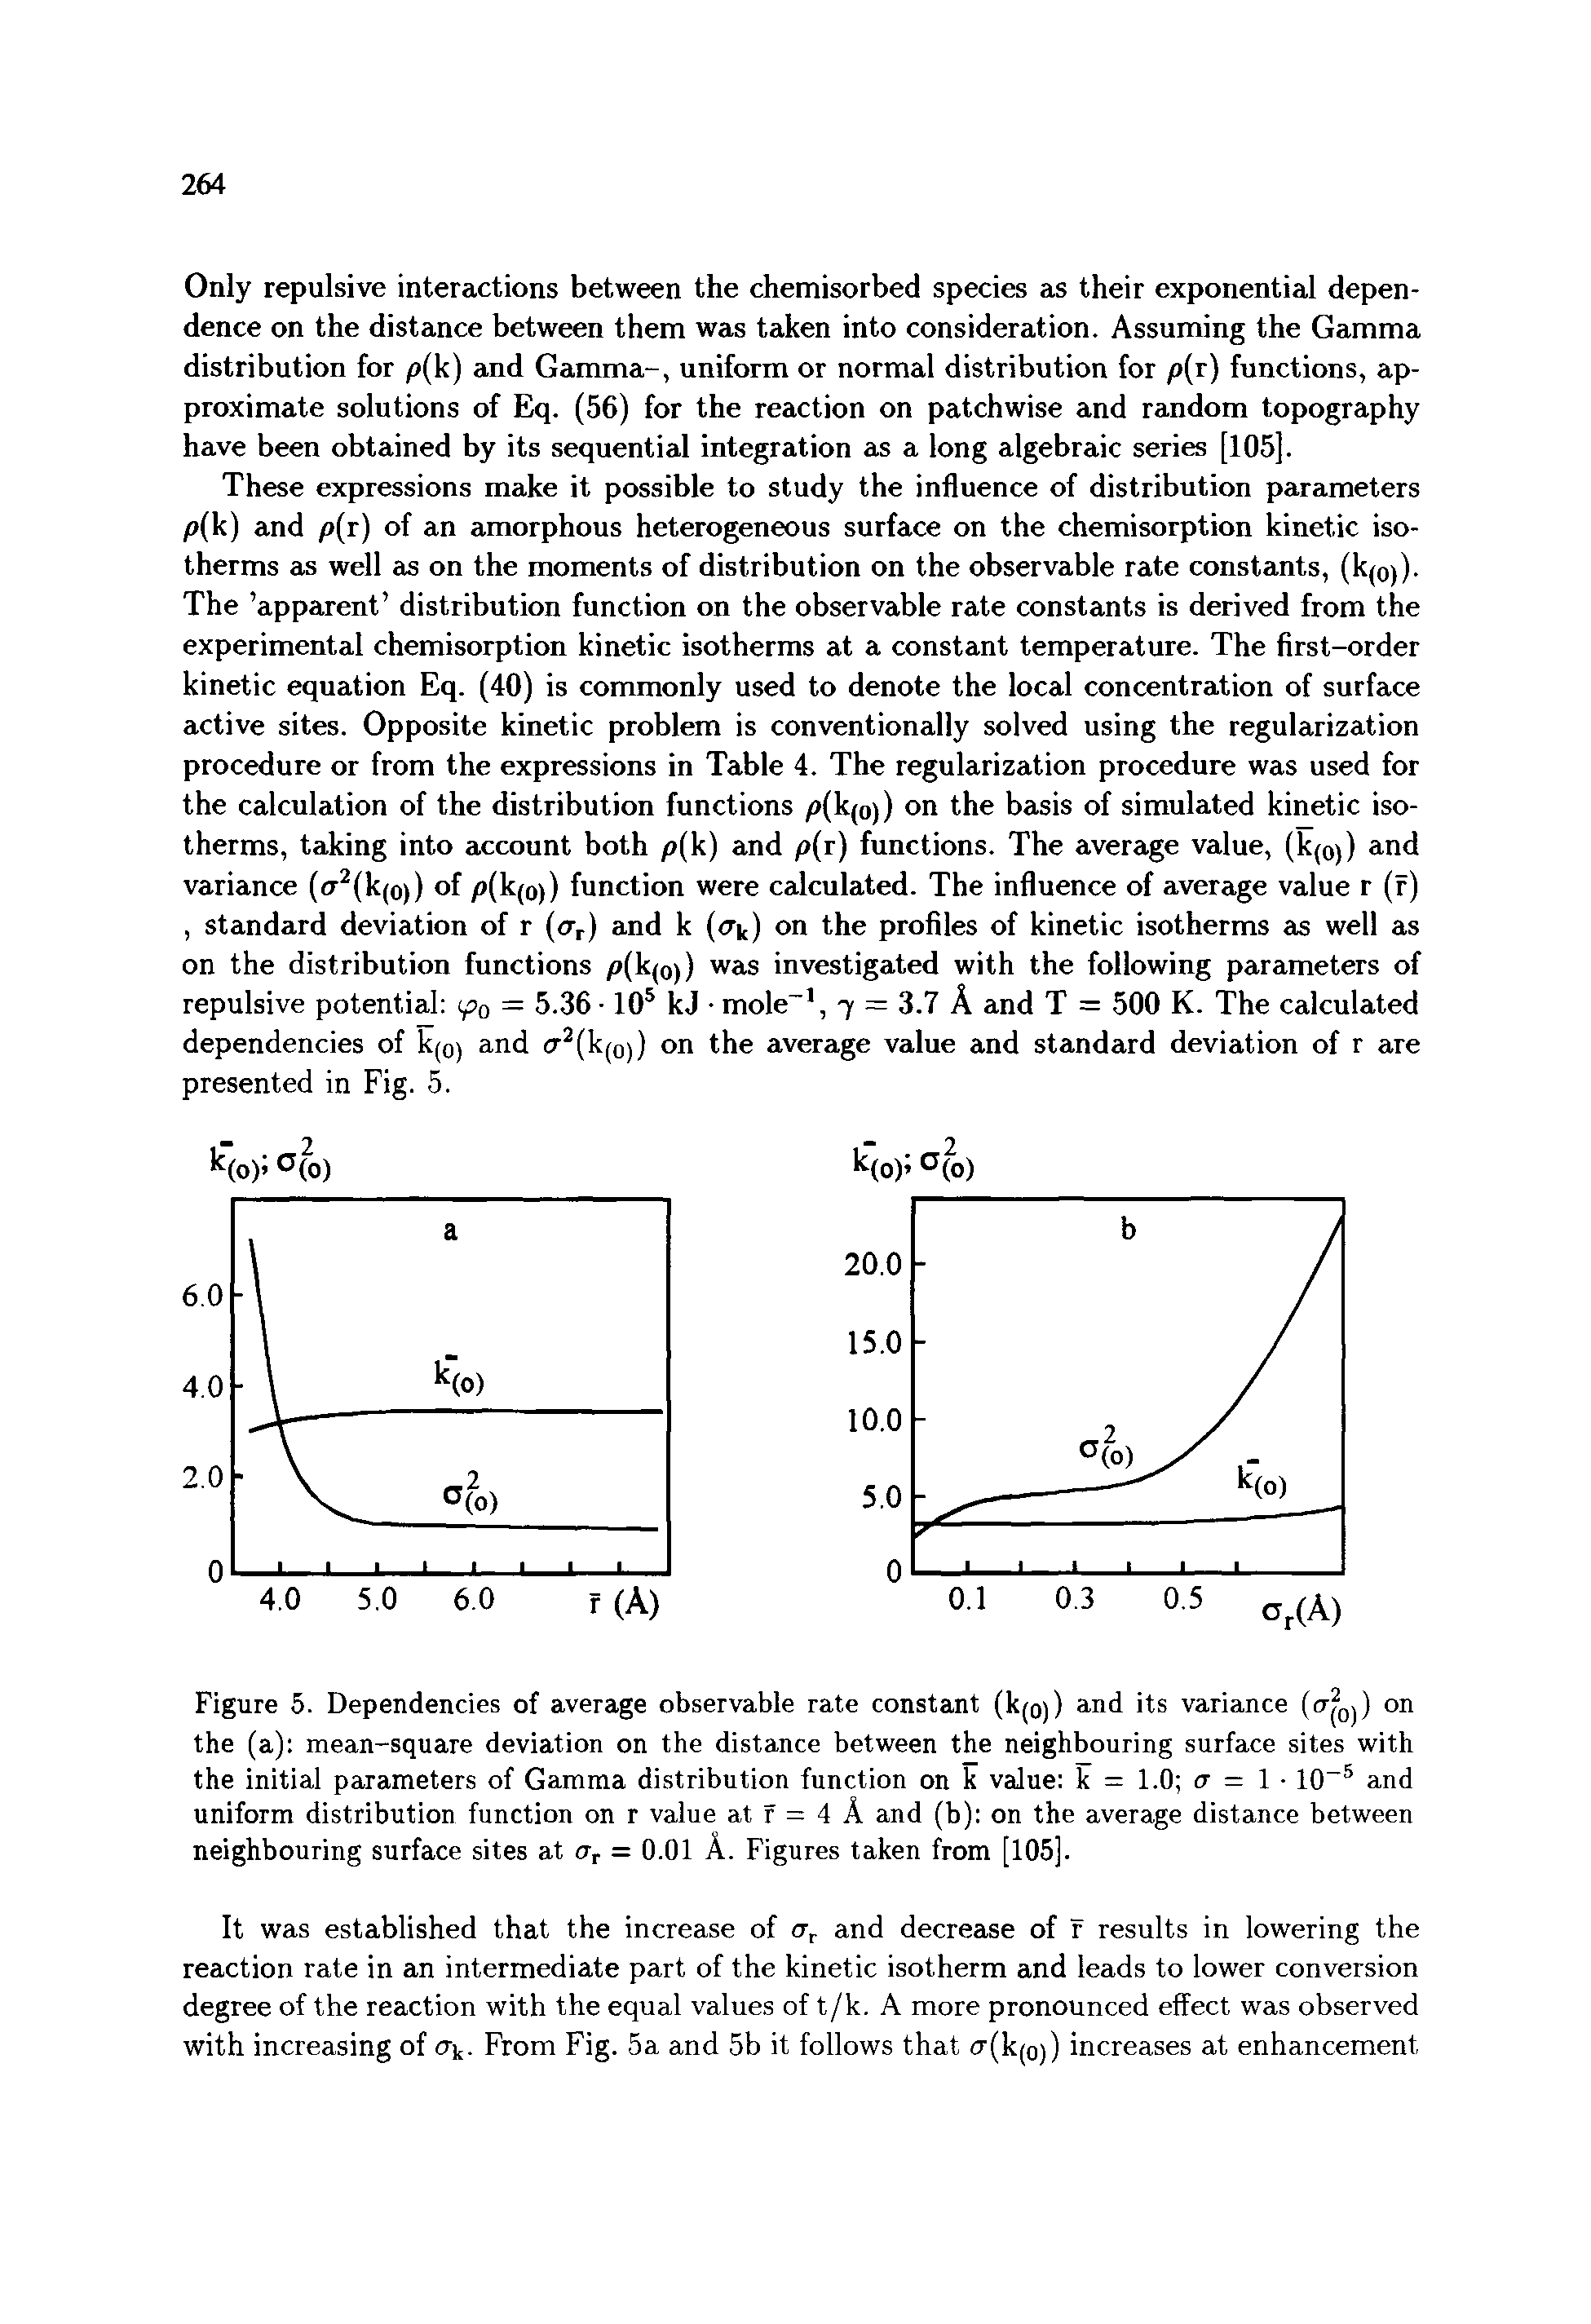 Figure 5. Dependencies of average observable rate constant (k(g)) and its variance (ctjo)) the (a) mean-square deviation on the distance between the neighbouring surface sites with the initial parameters of Gamma distribution function on k value k = 1.0 cr = 1 10 and uniform distribution function on r value at f = 4 A and (b) on the average distance between neighbouring surface sites at CTf = 0.01 A. Figures taken from [105].